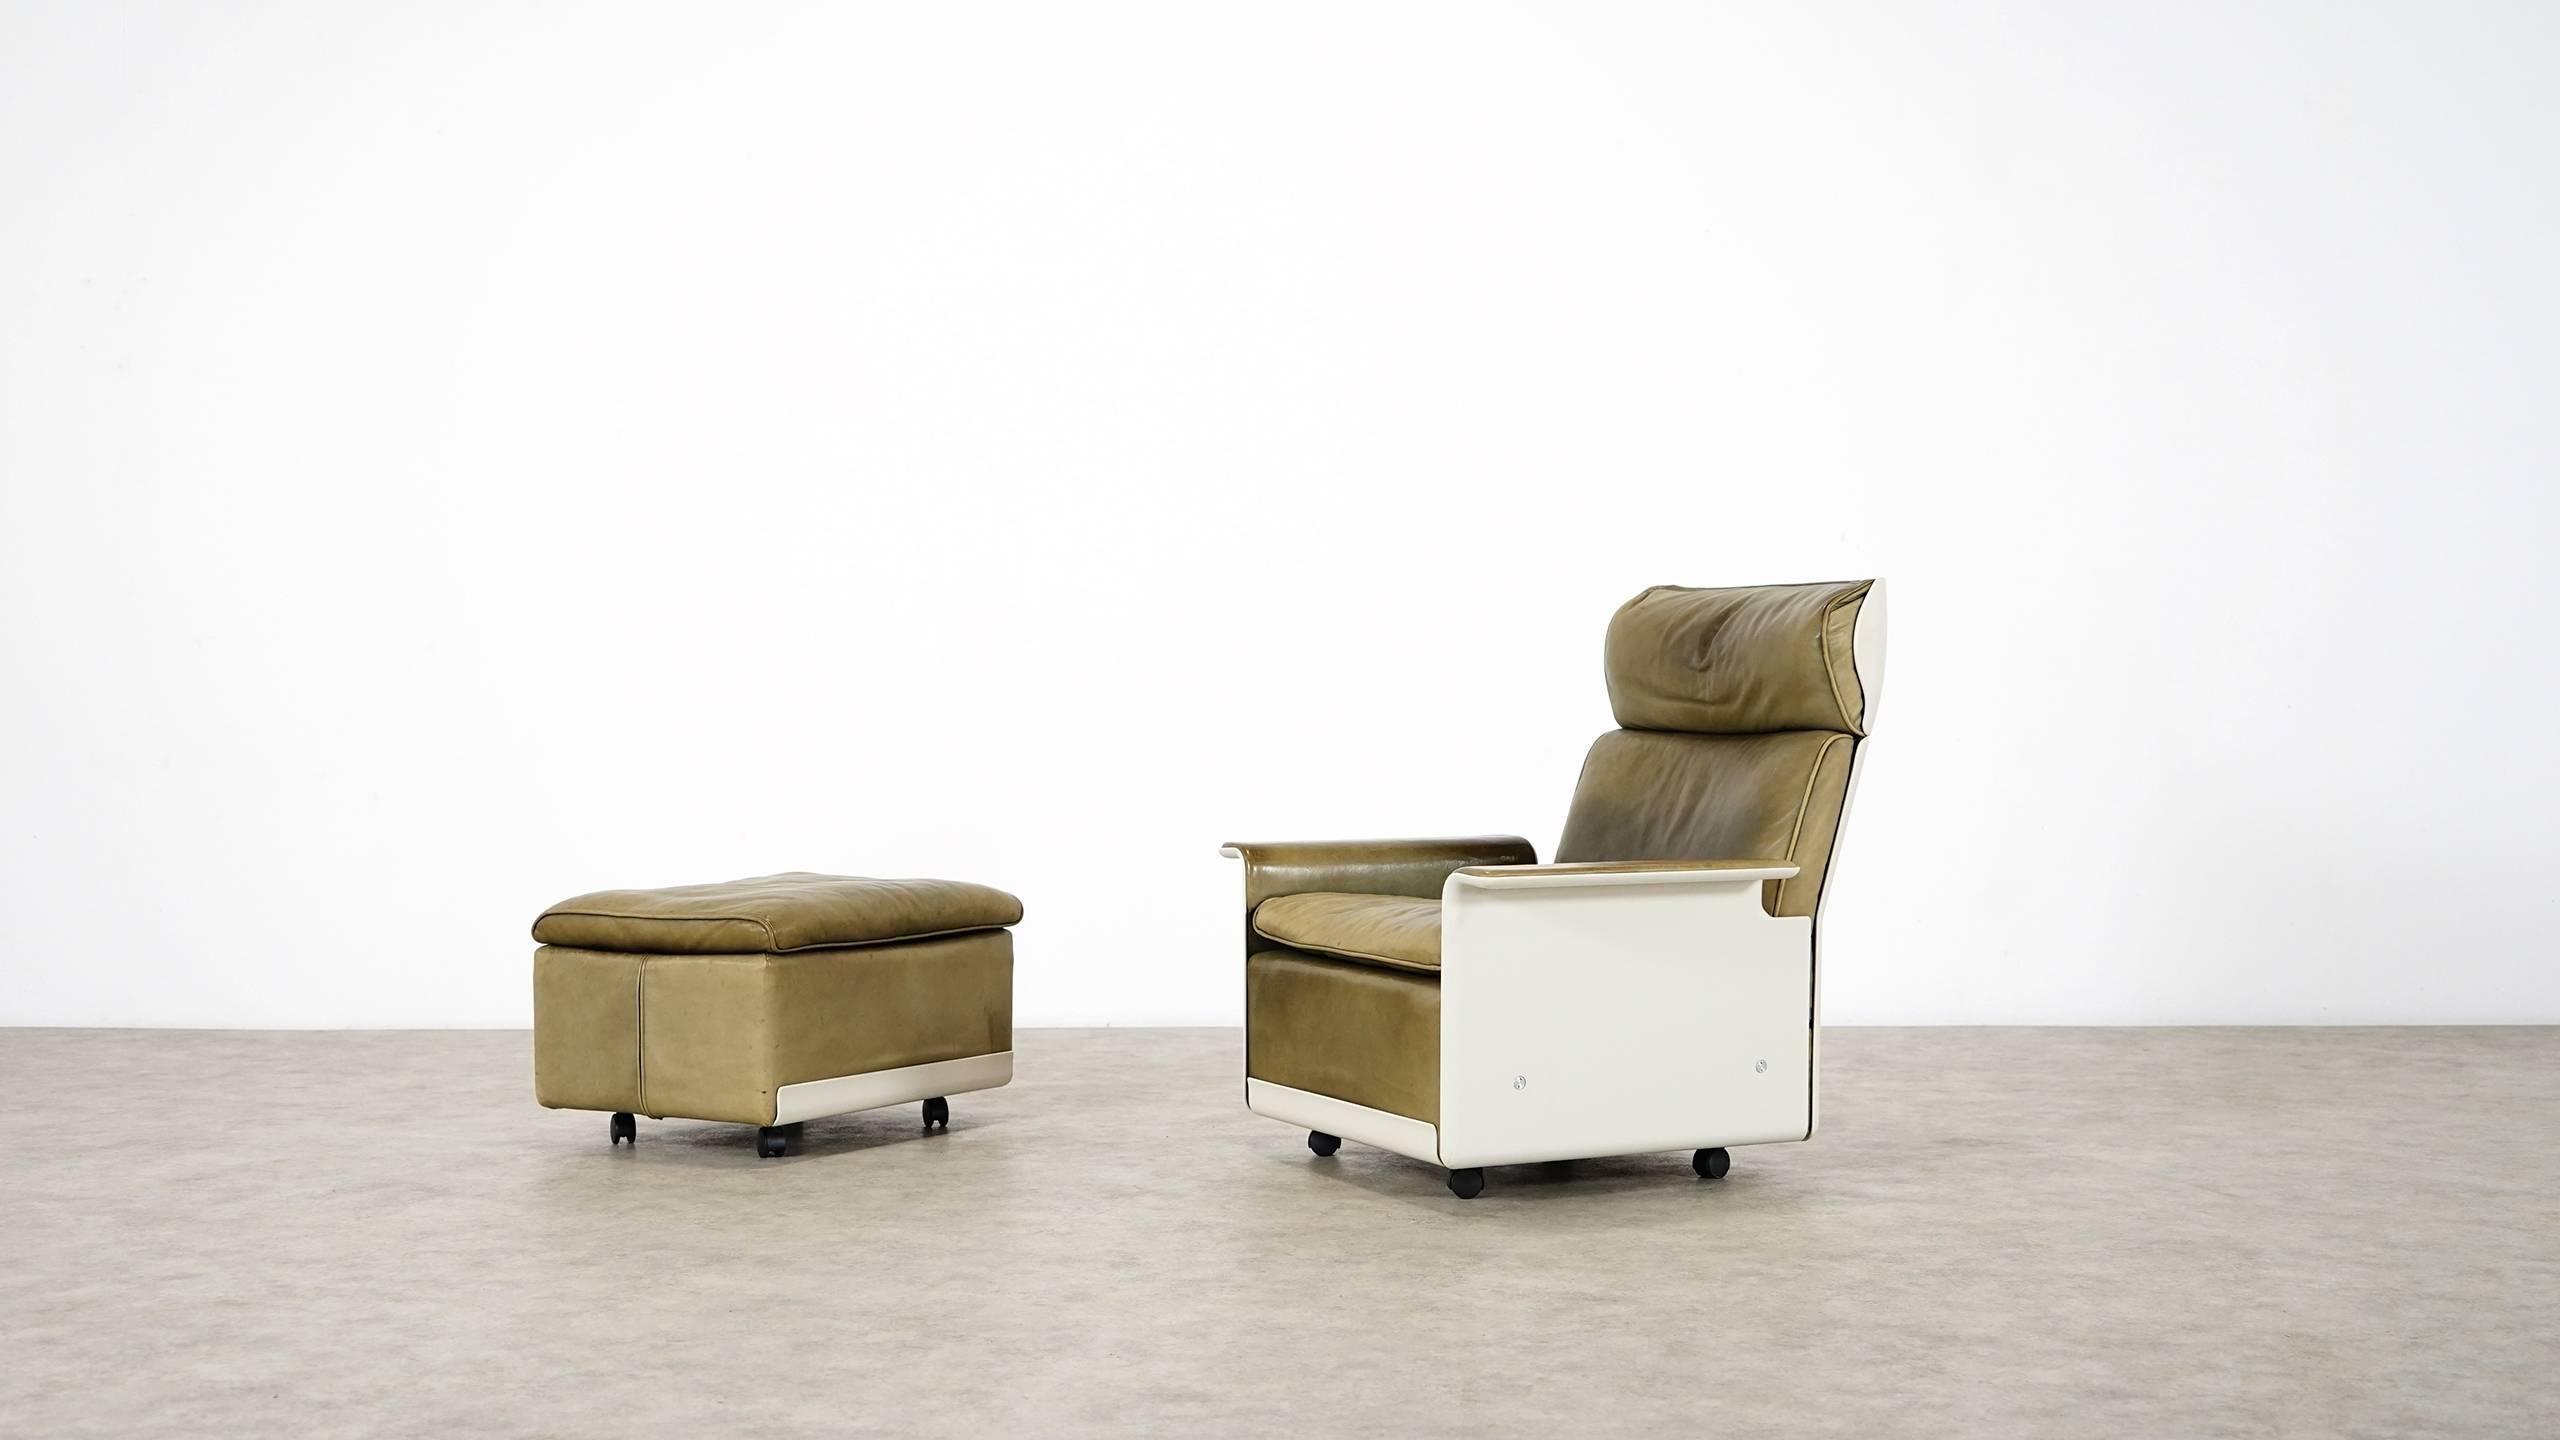 Lounge chair and its ottoman from the 620 Chair Programme.
Designed by Dieter Rams for Vitsœ in 1962.

The 620 Chair Programme is a kit of parts that adapts to your changing life. Separate chairs can become a sofa – or vice versa – at any time in